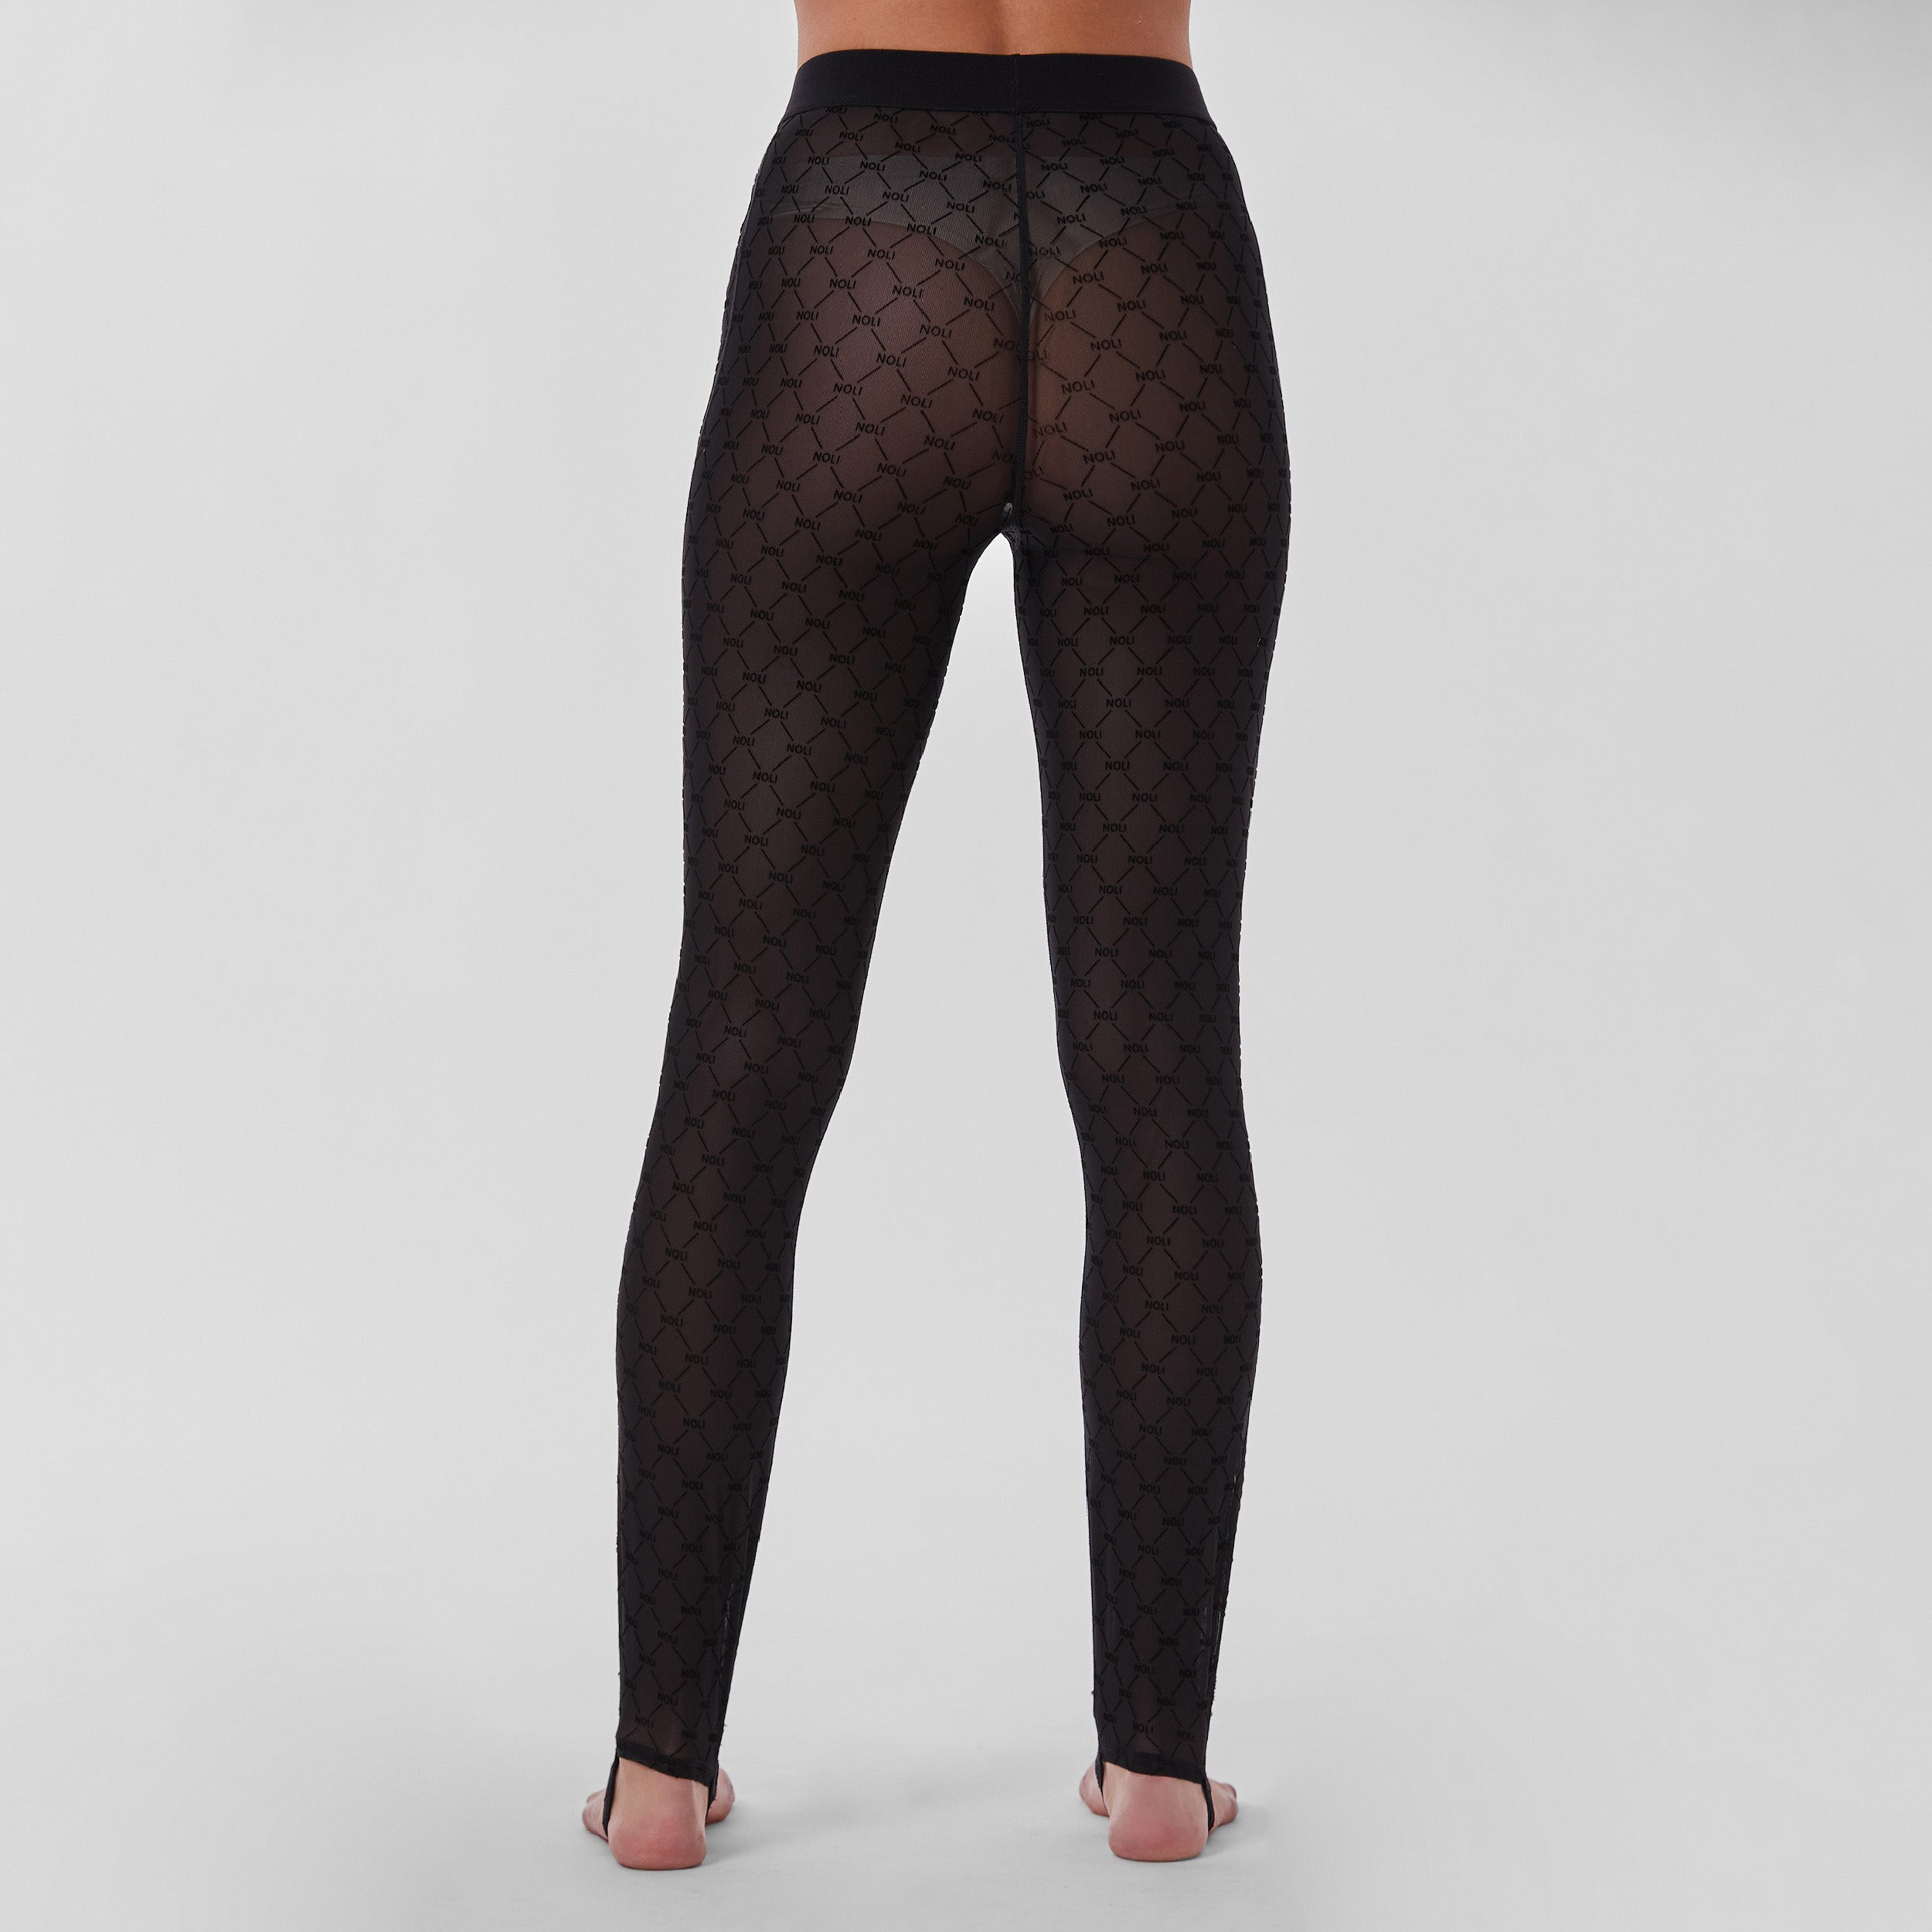 Rear view of woman wearing tights featuring ultra-soft and comfortable NOLI monogram mesh, slip this four-way stretch mesh